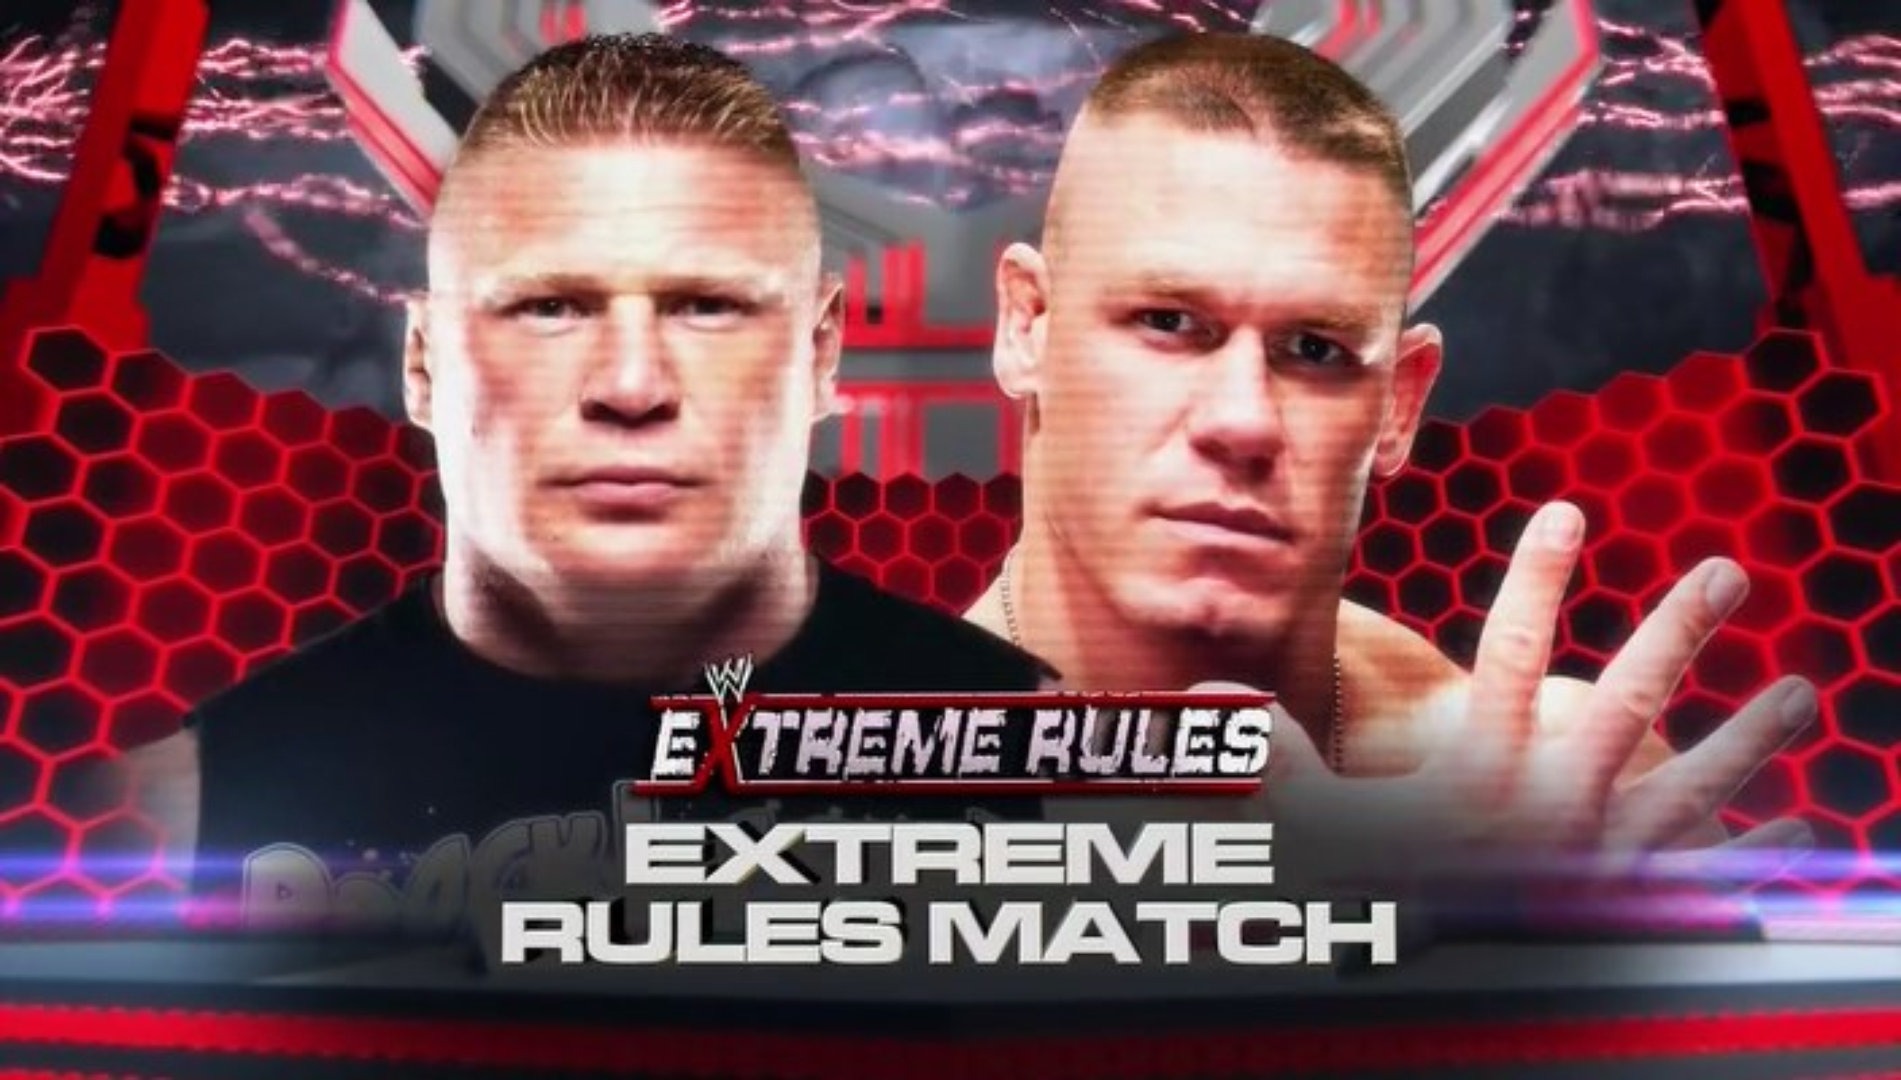 EXTREME RULES BROCK LESNAR